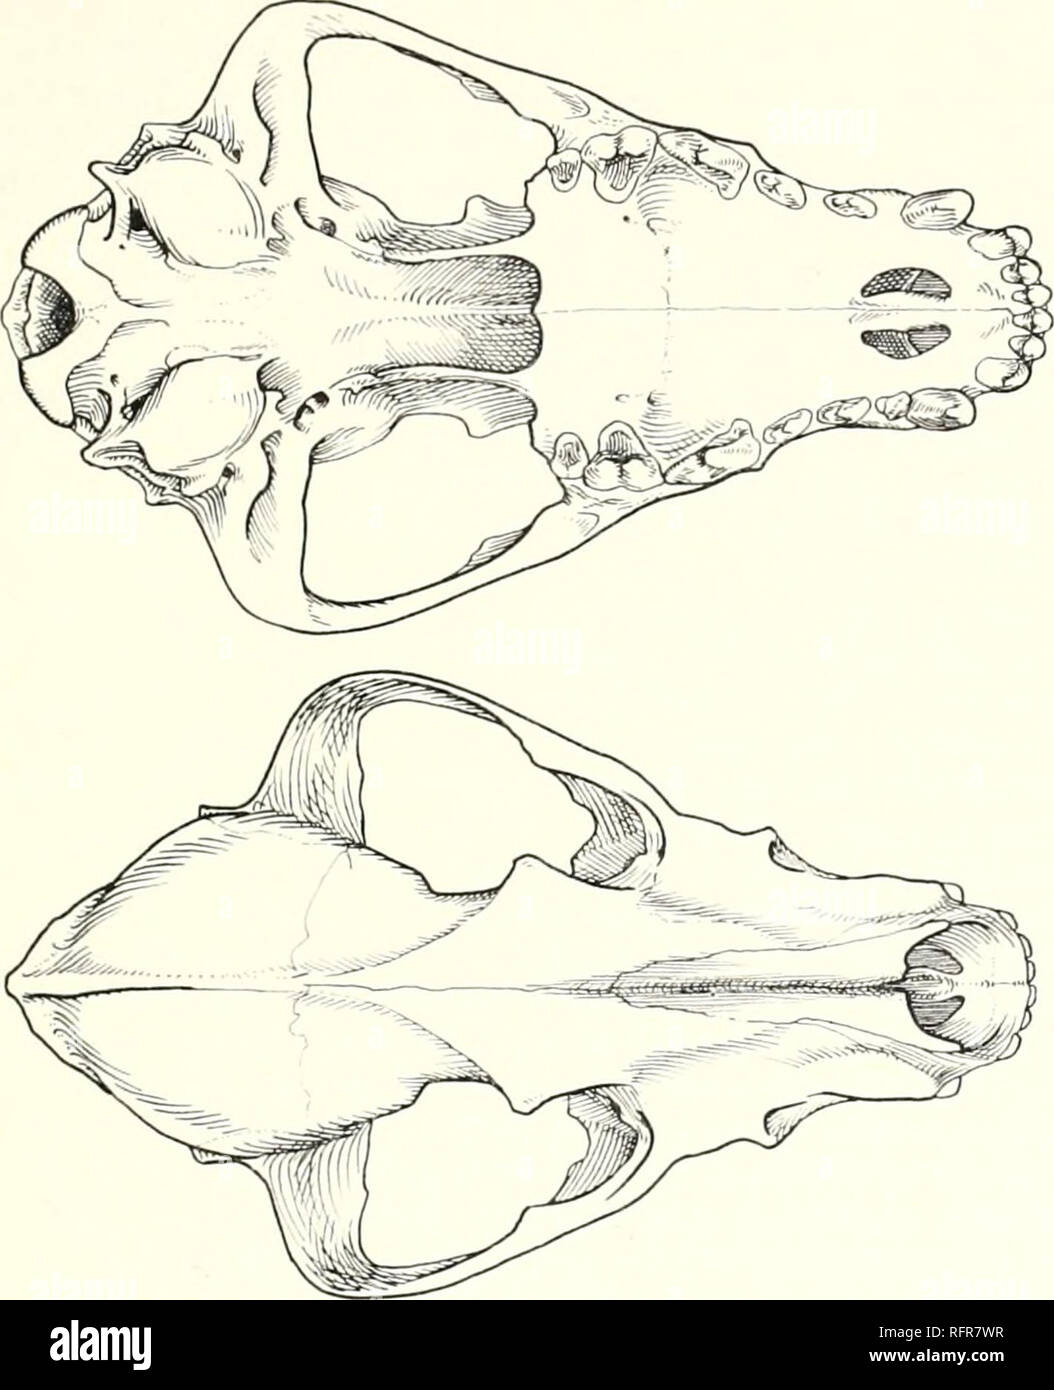 . The carnivores of West Africa. LYCAON 8l. Fic. II. Lycai'ii picnis: skull, Tvpc of sliariiiif. B.M. No. 7.7.S.74, v, -&lt; '; palatal &amp;' dorsal views Hunting is normally engaged in regularly twice a day, in the early morning and late evening; but if the weather is deeply overcast, or for some other less apparent reason, it may as an exception be carried out during the intervening period. A chase has been known to be continued till after dark (Estcs &amp; Goddard, 1967); and moonlight hunts have also been recorded; but such nocturnal events in ill-lit conditions are relatively rare since  Stock Photo